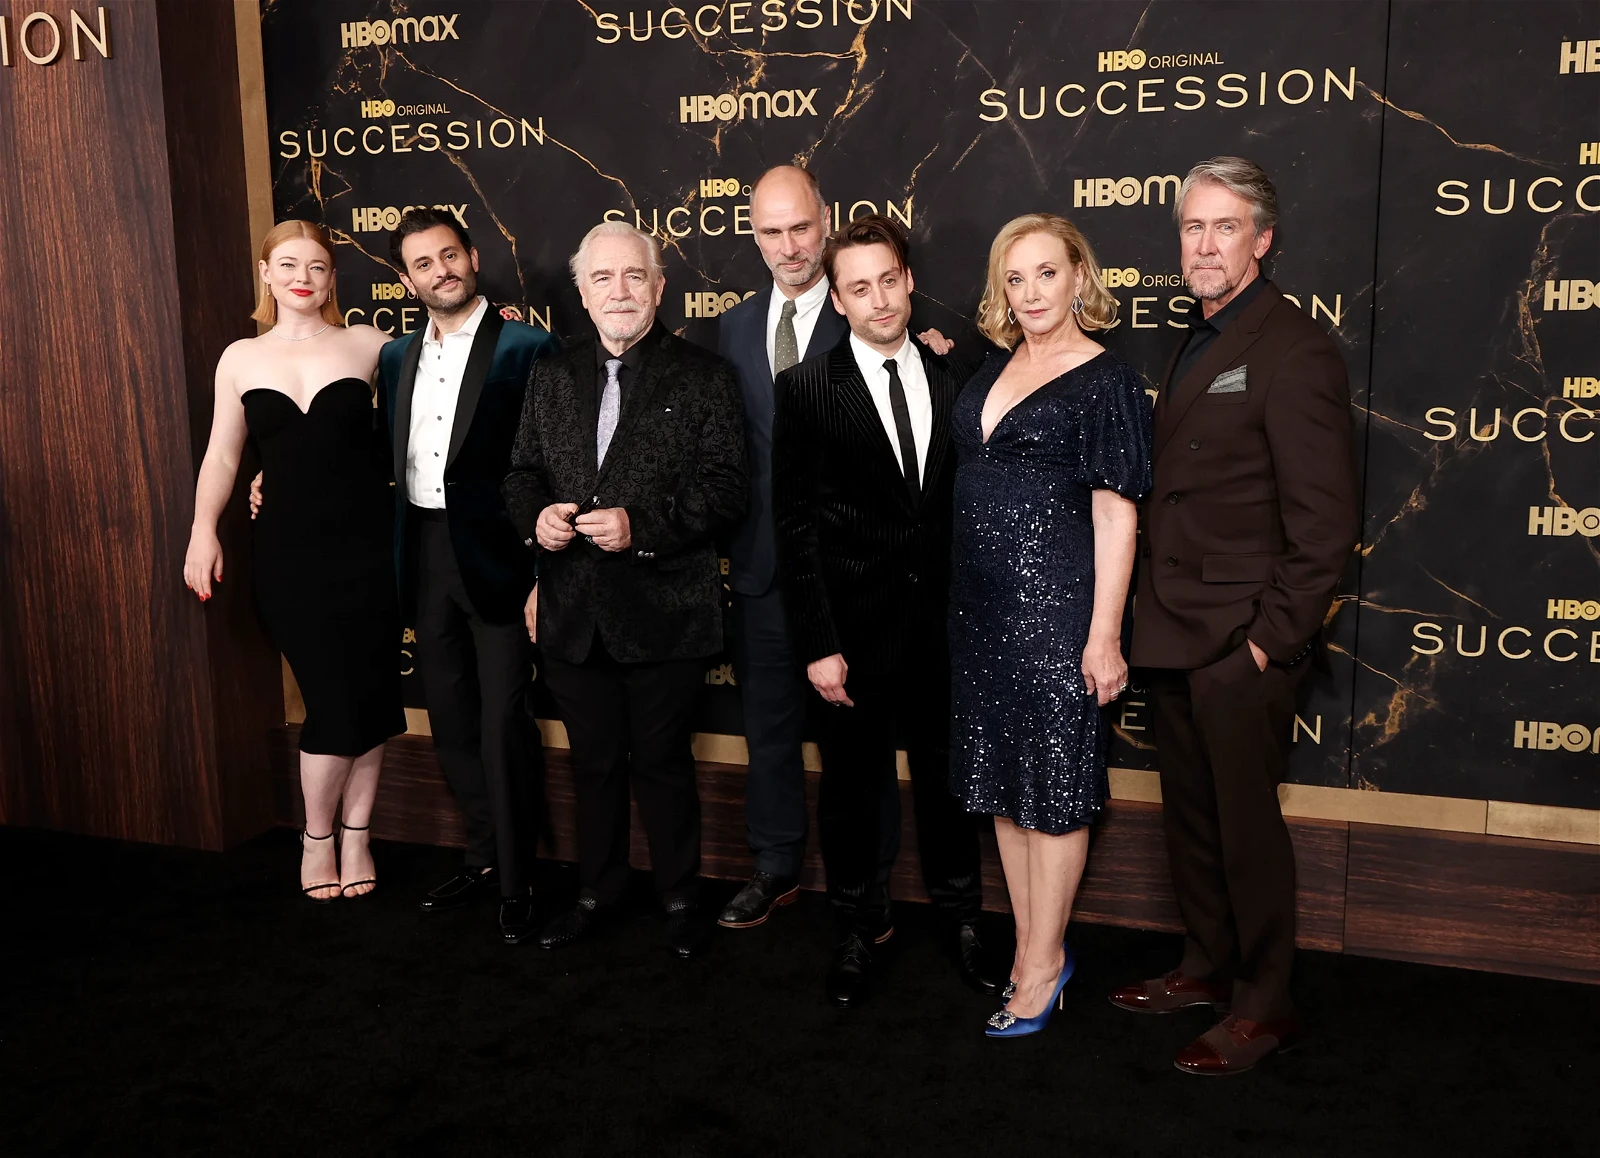 Brian Cox and the Succession team